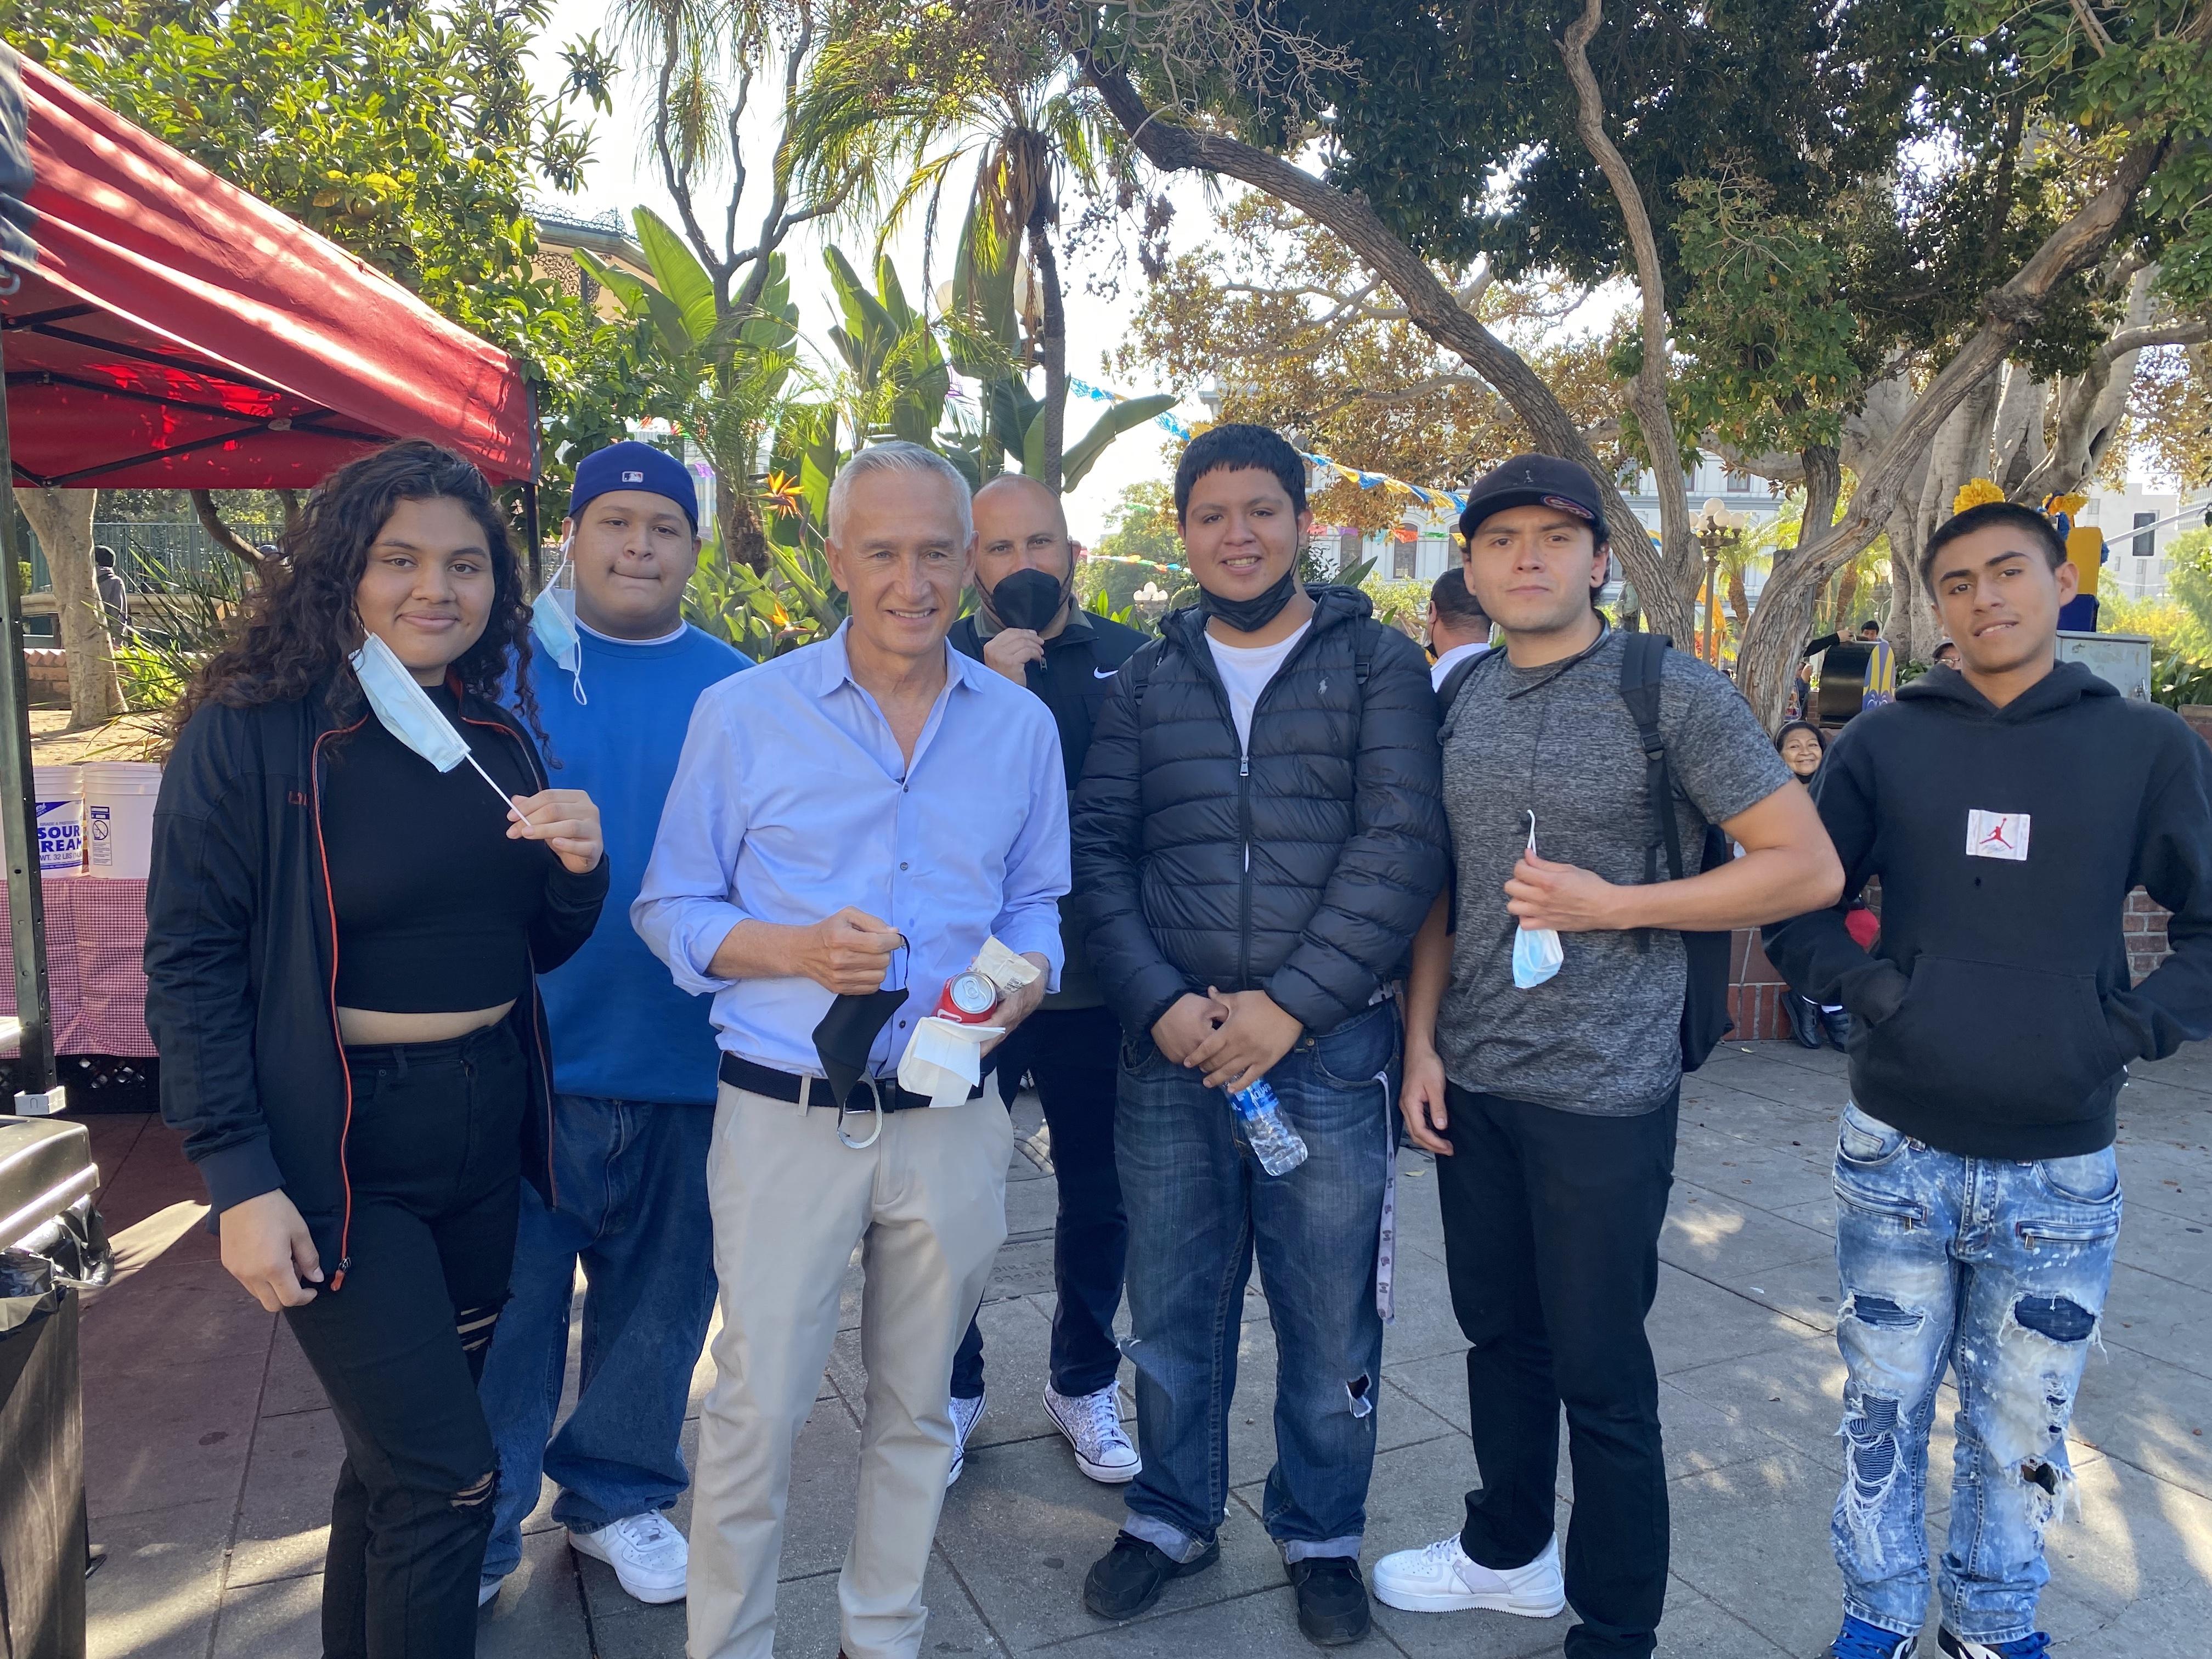 Students pose with journalist Jorge Ramos